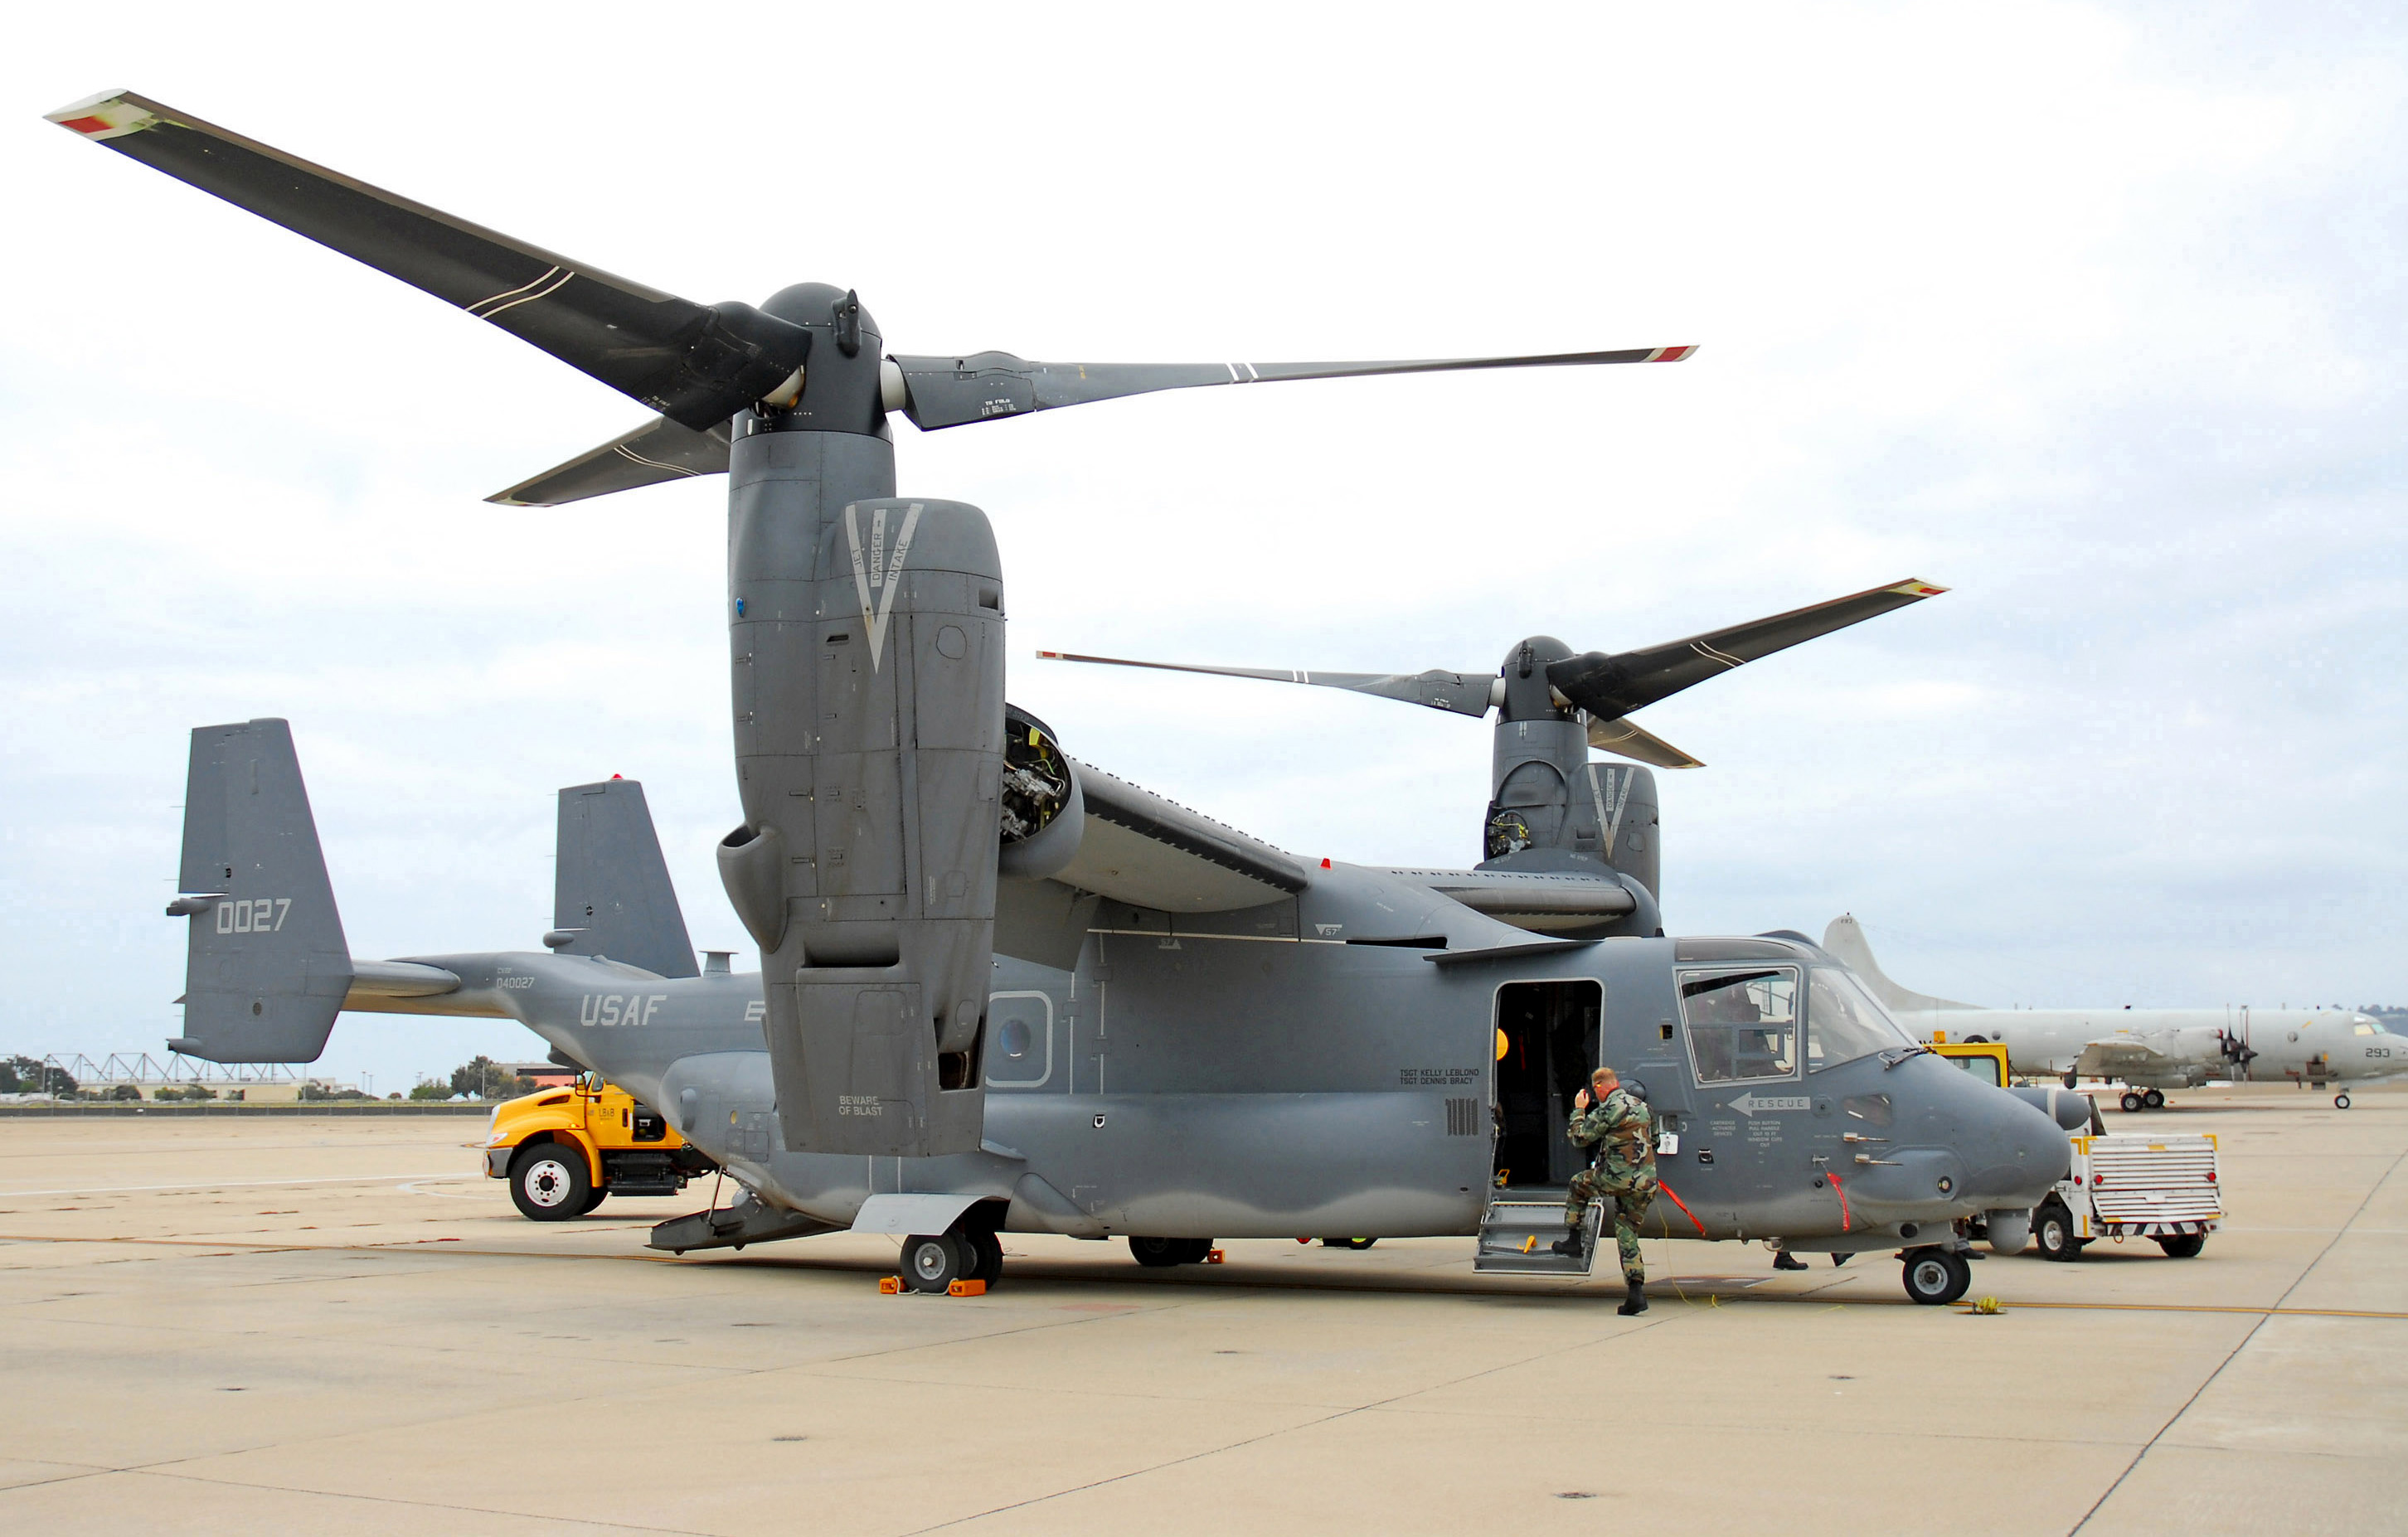 General 2904x1854 Boeing-Bell V-22 Osprey aircraft vehicle military aircraft military military vehicle tiltrotor US Air Force Boeing American aircraft clouds overcast sky men soldier uniform